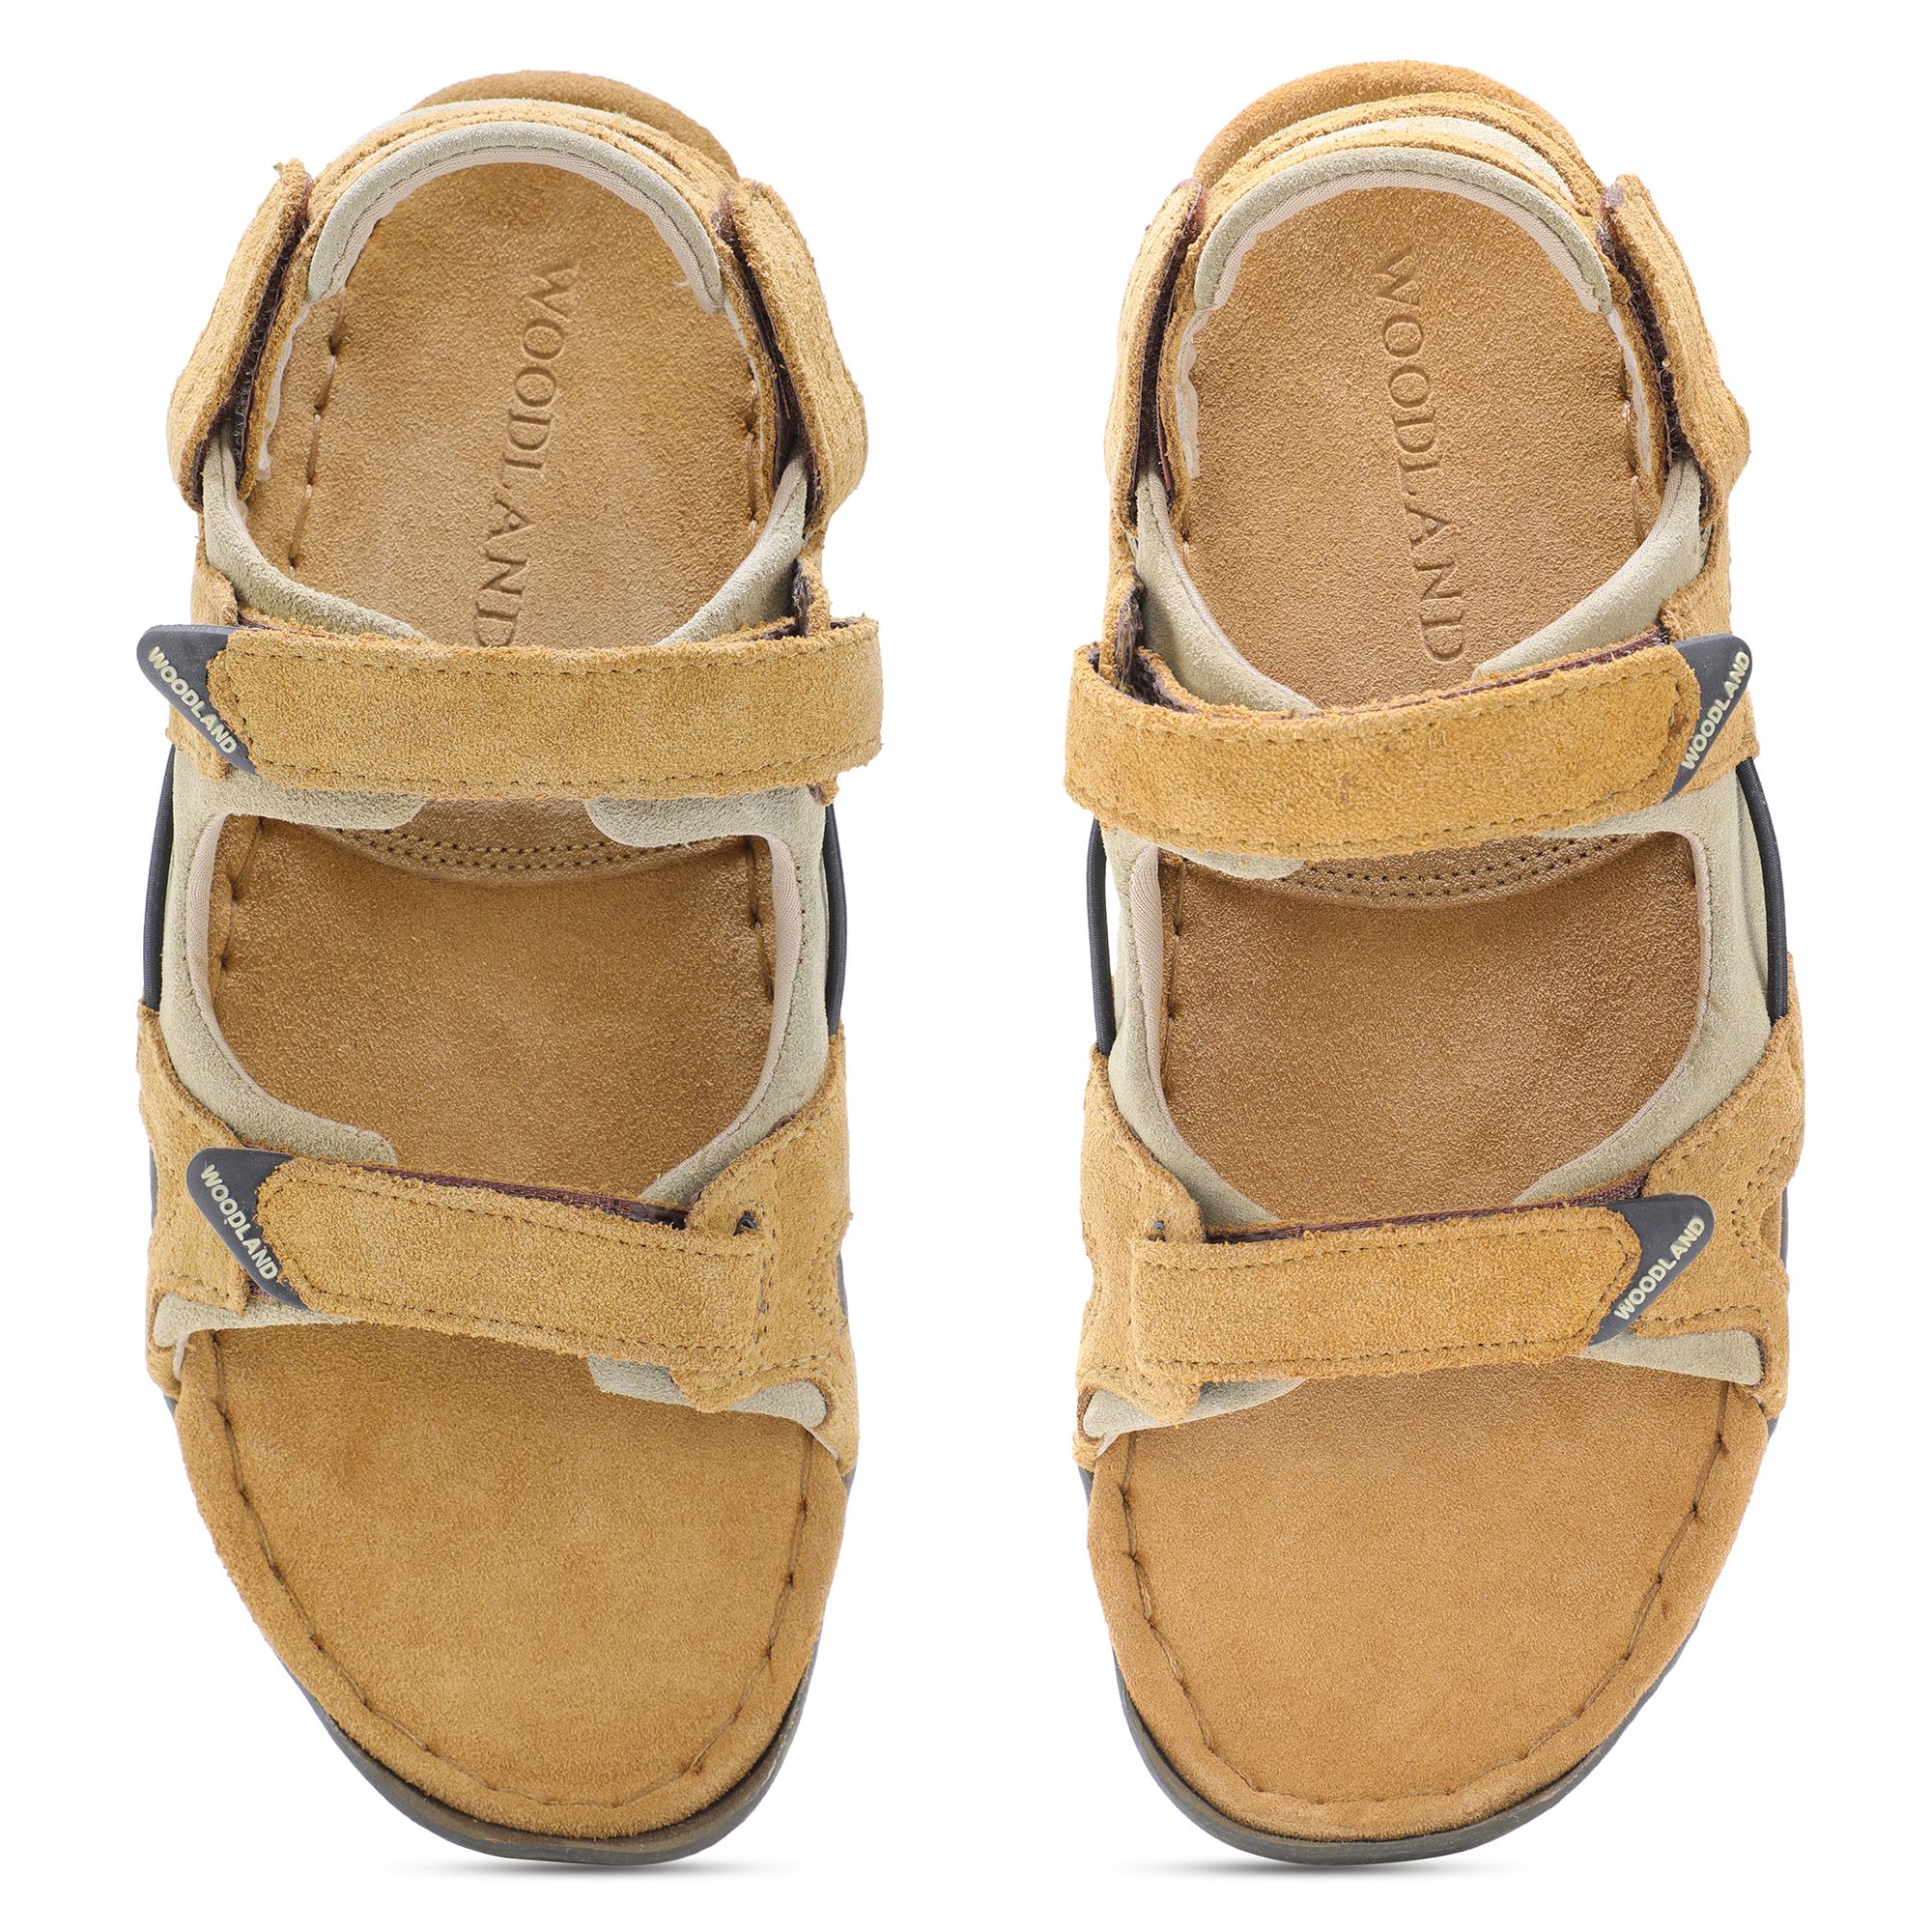 leisure camel 2 795 prices include taxes color camel size size guide 39 ...